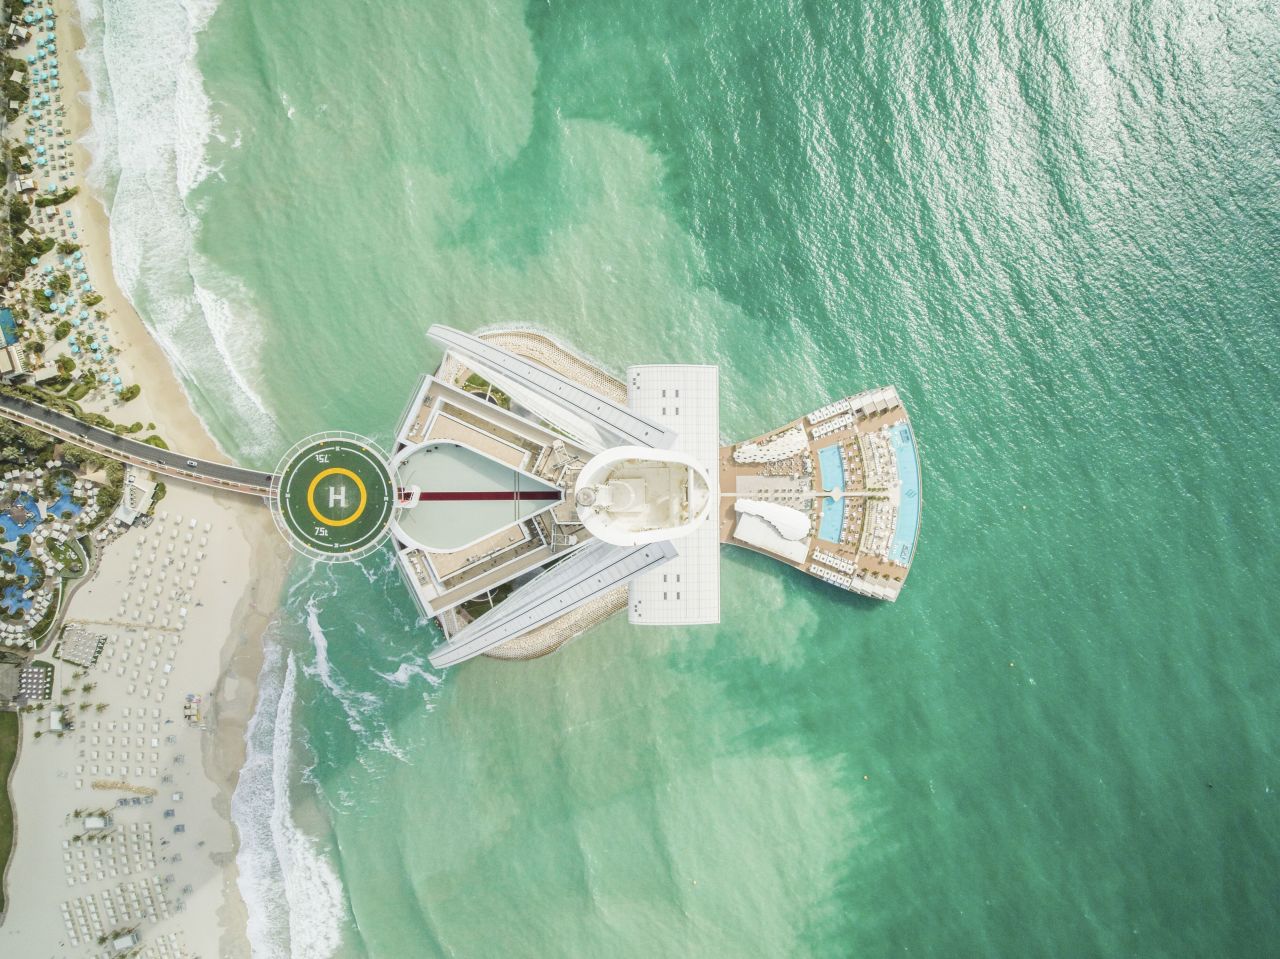 Set above the 59th floor of the Burj al Arab hotel, this helipad watches over the Dubai coastline. Since 1999, it has hosted an impressive line-up of international sporting stars.